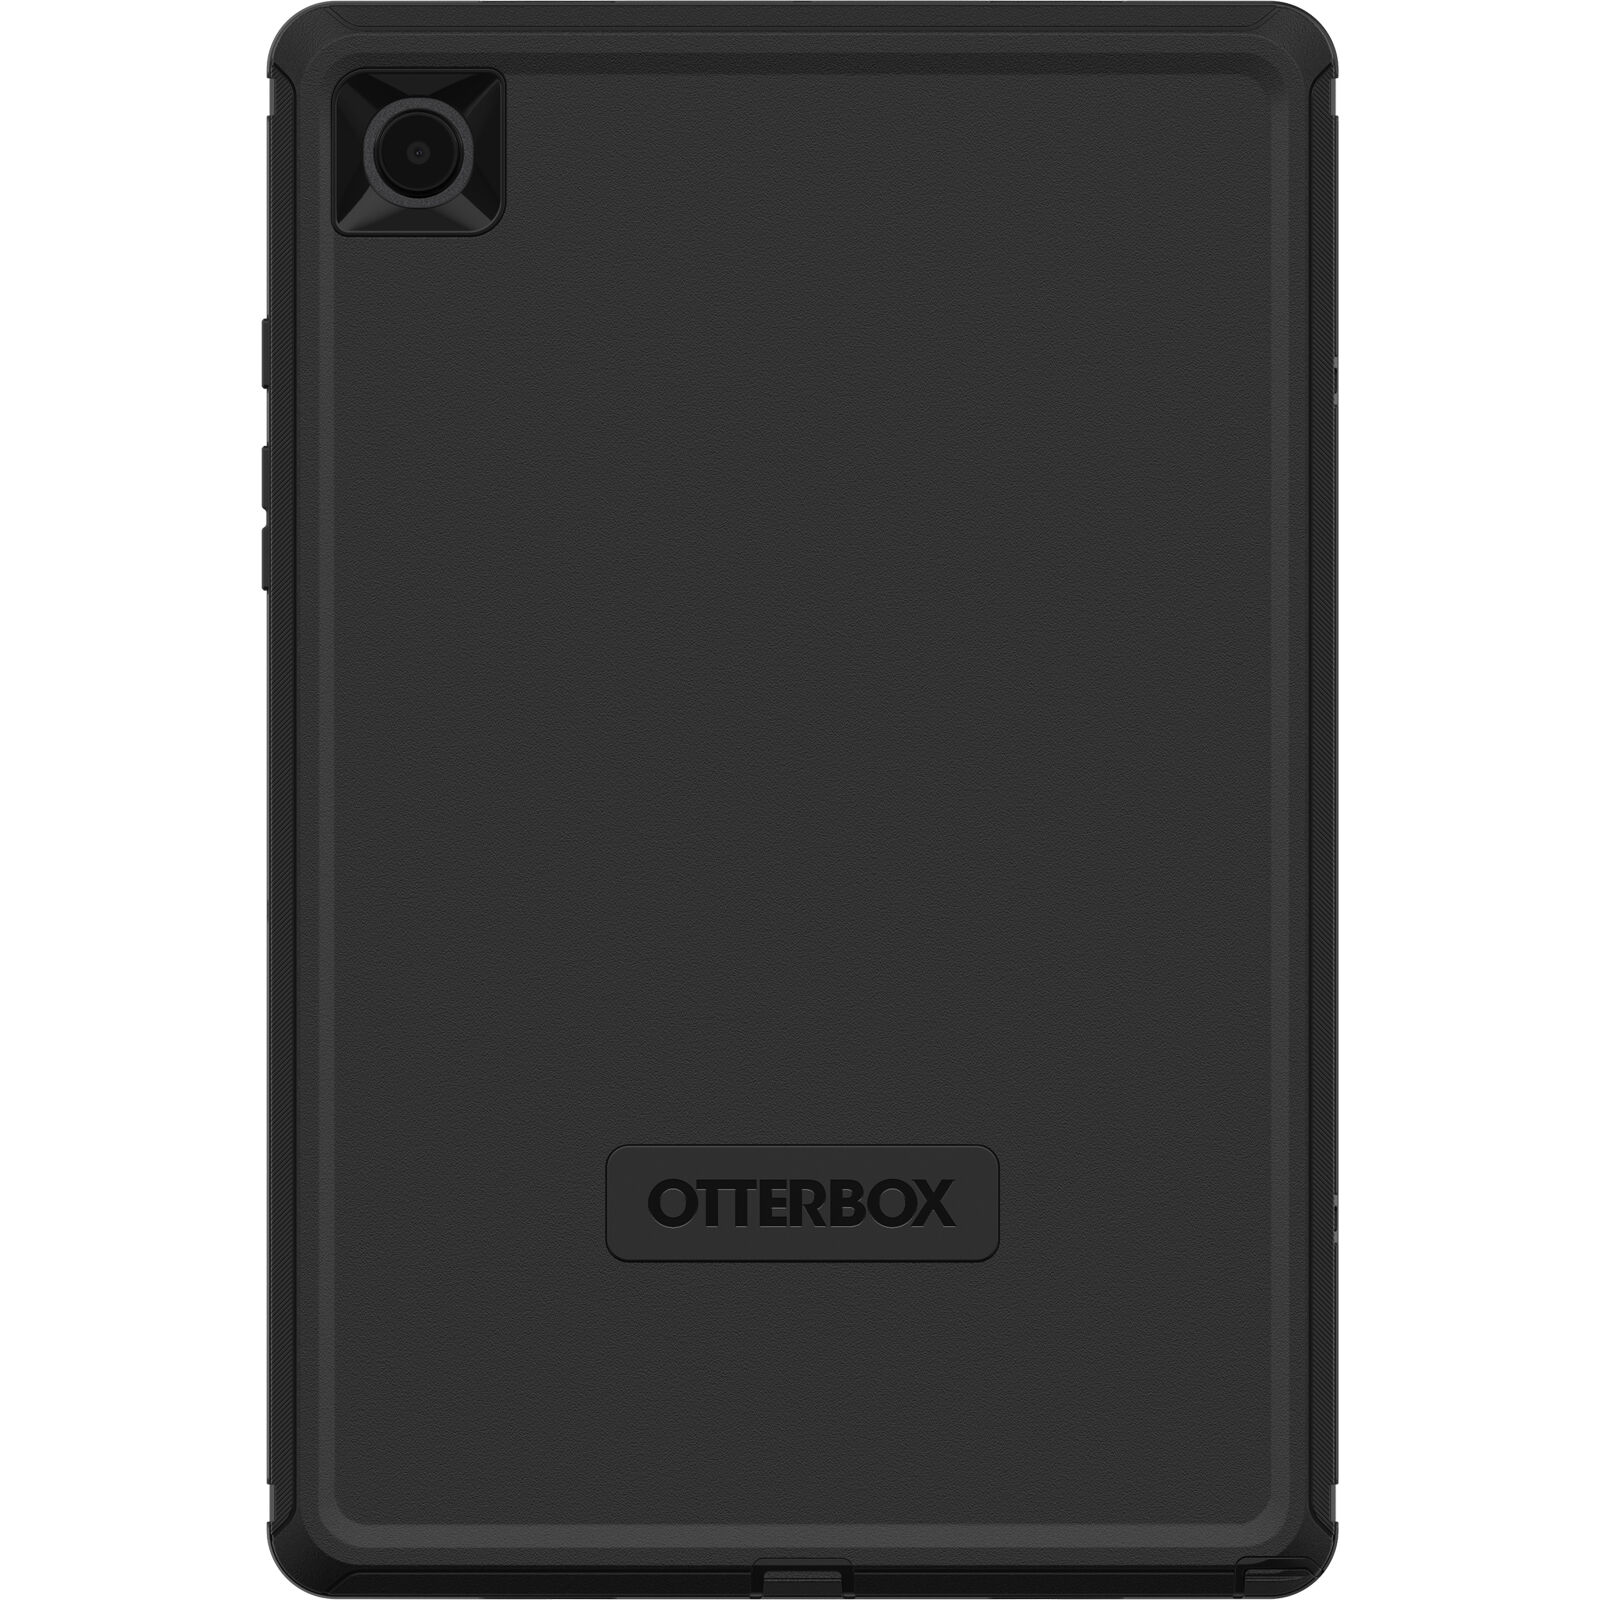 OtterBox Defender Series for Samsung Galaxy Tab A8, black - No Retail Packaging